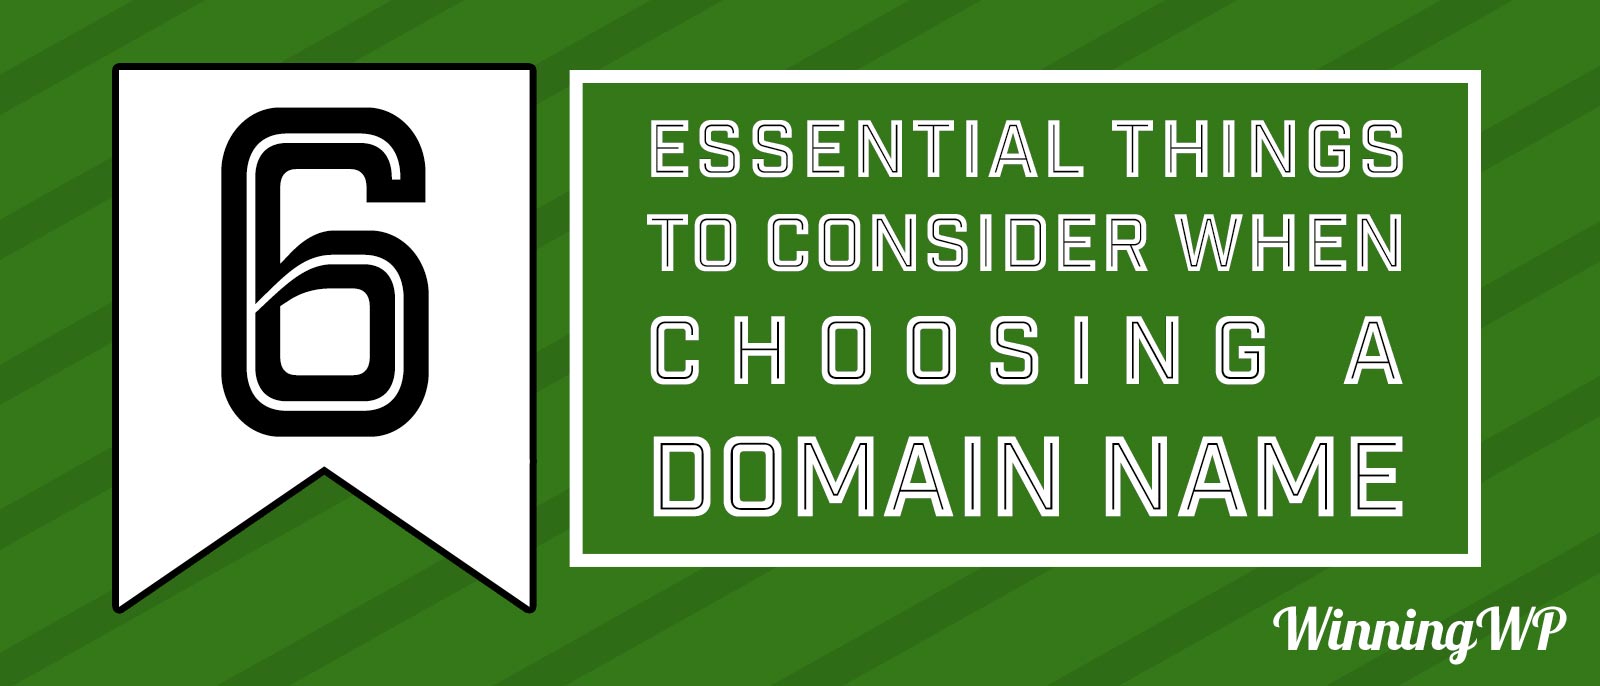 Six Things to Consider When Choosing a Domain Name